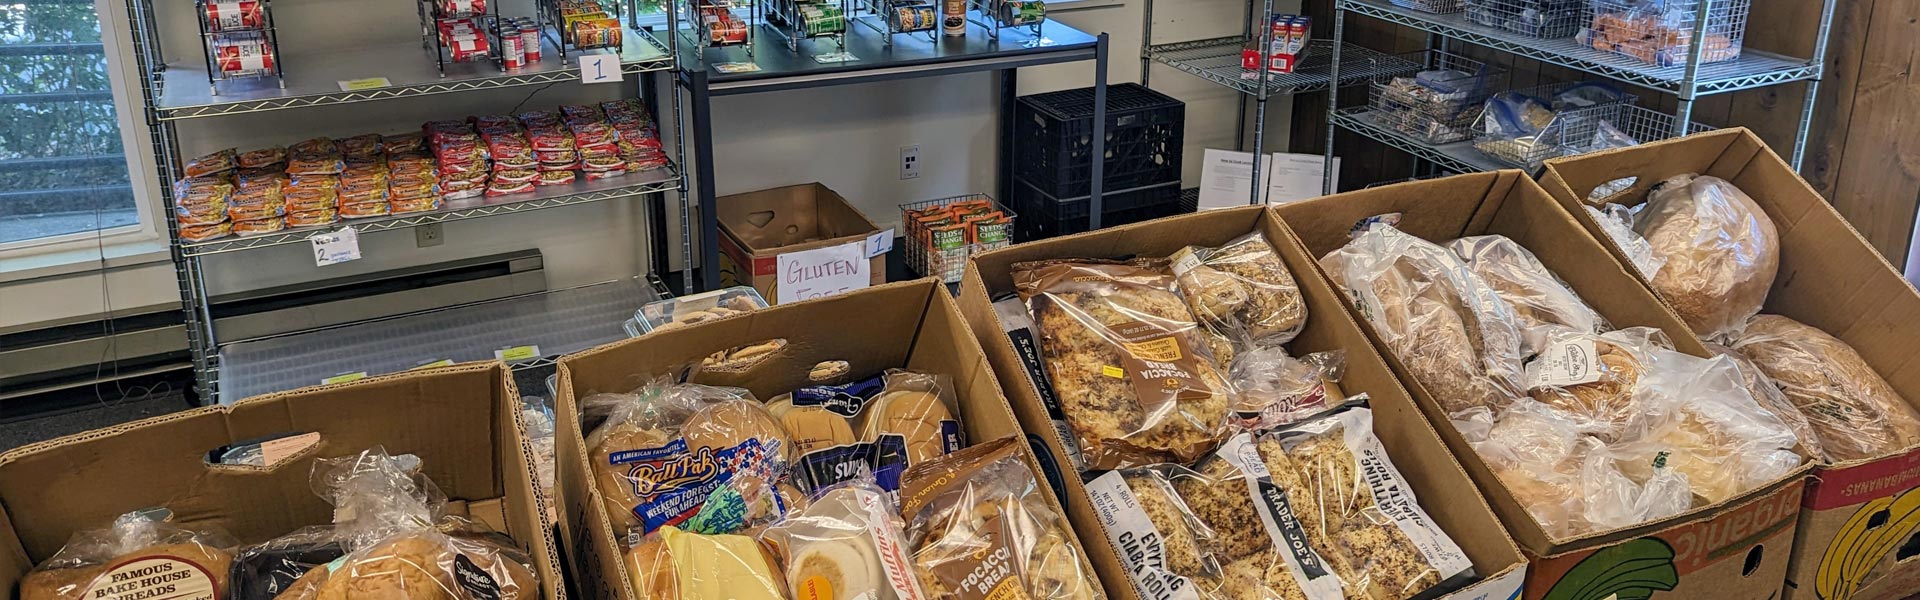 Food available at the food pantry